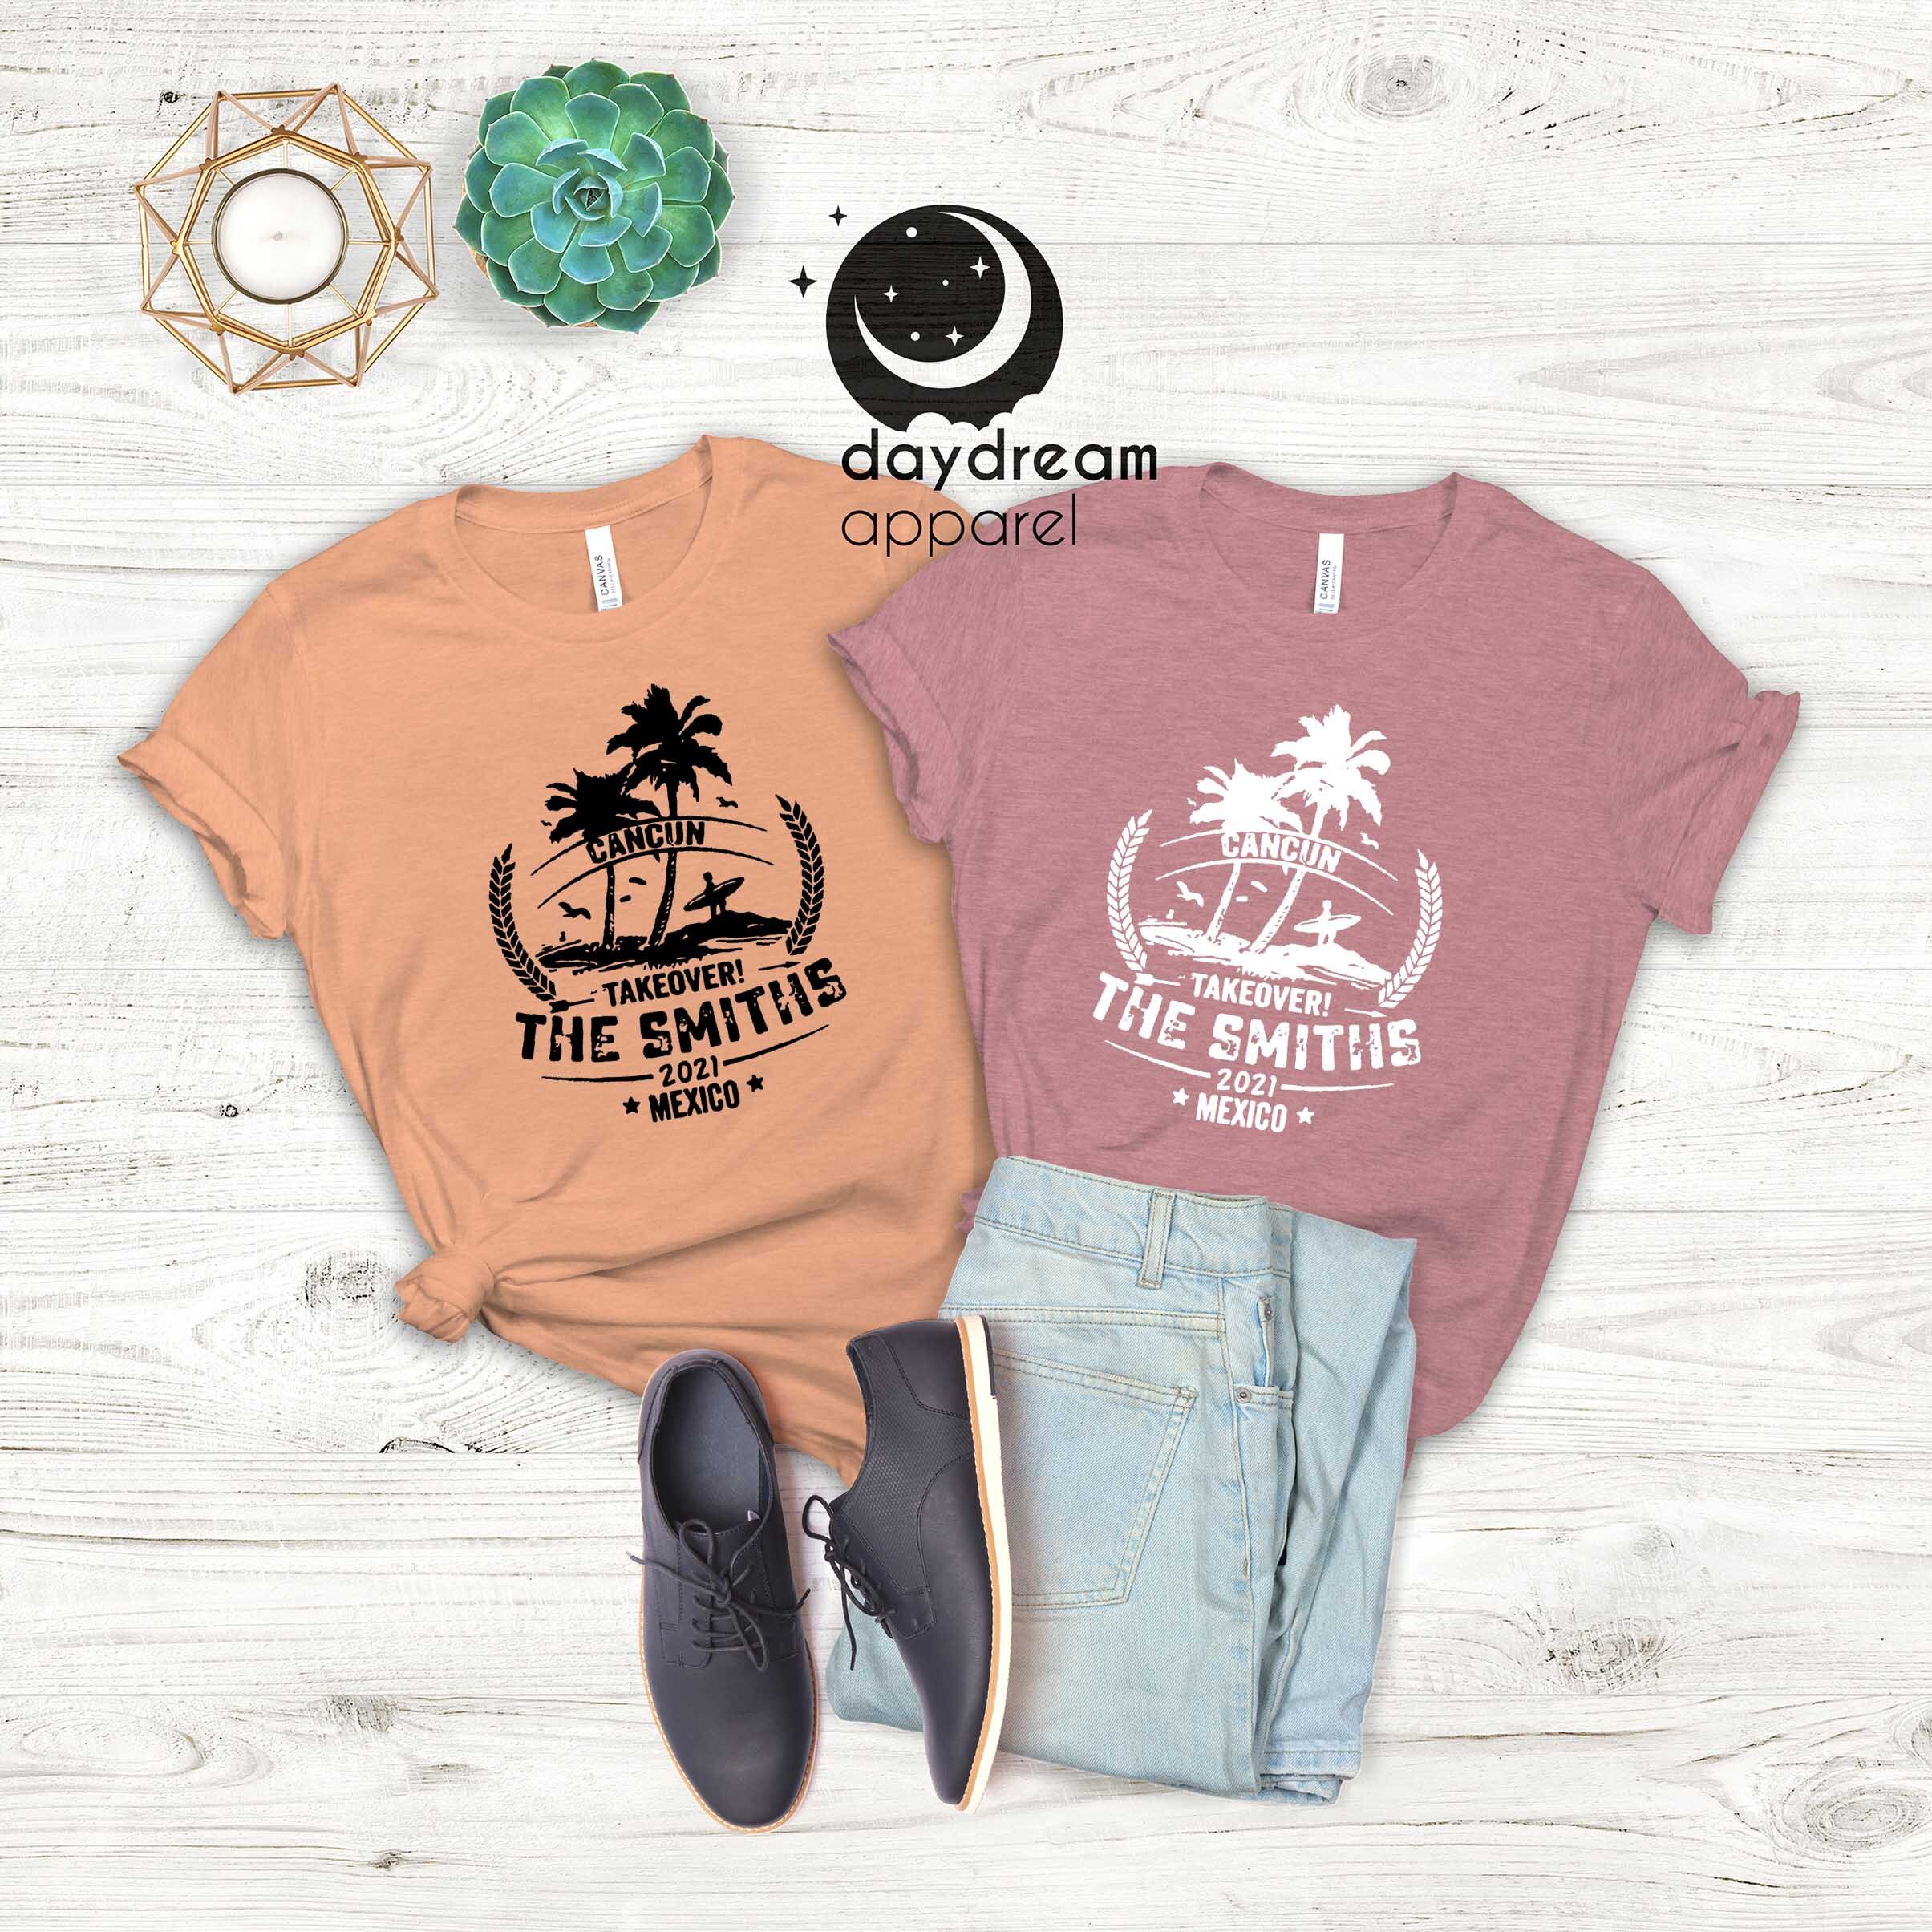 Daydreaming Queen Circle Retro Sunset T-Shirt Unisex